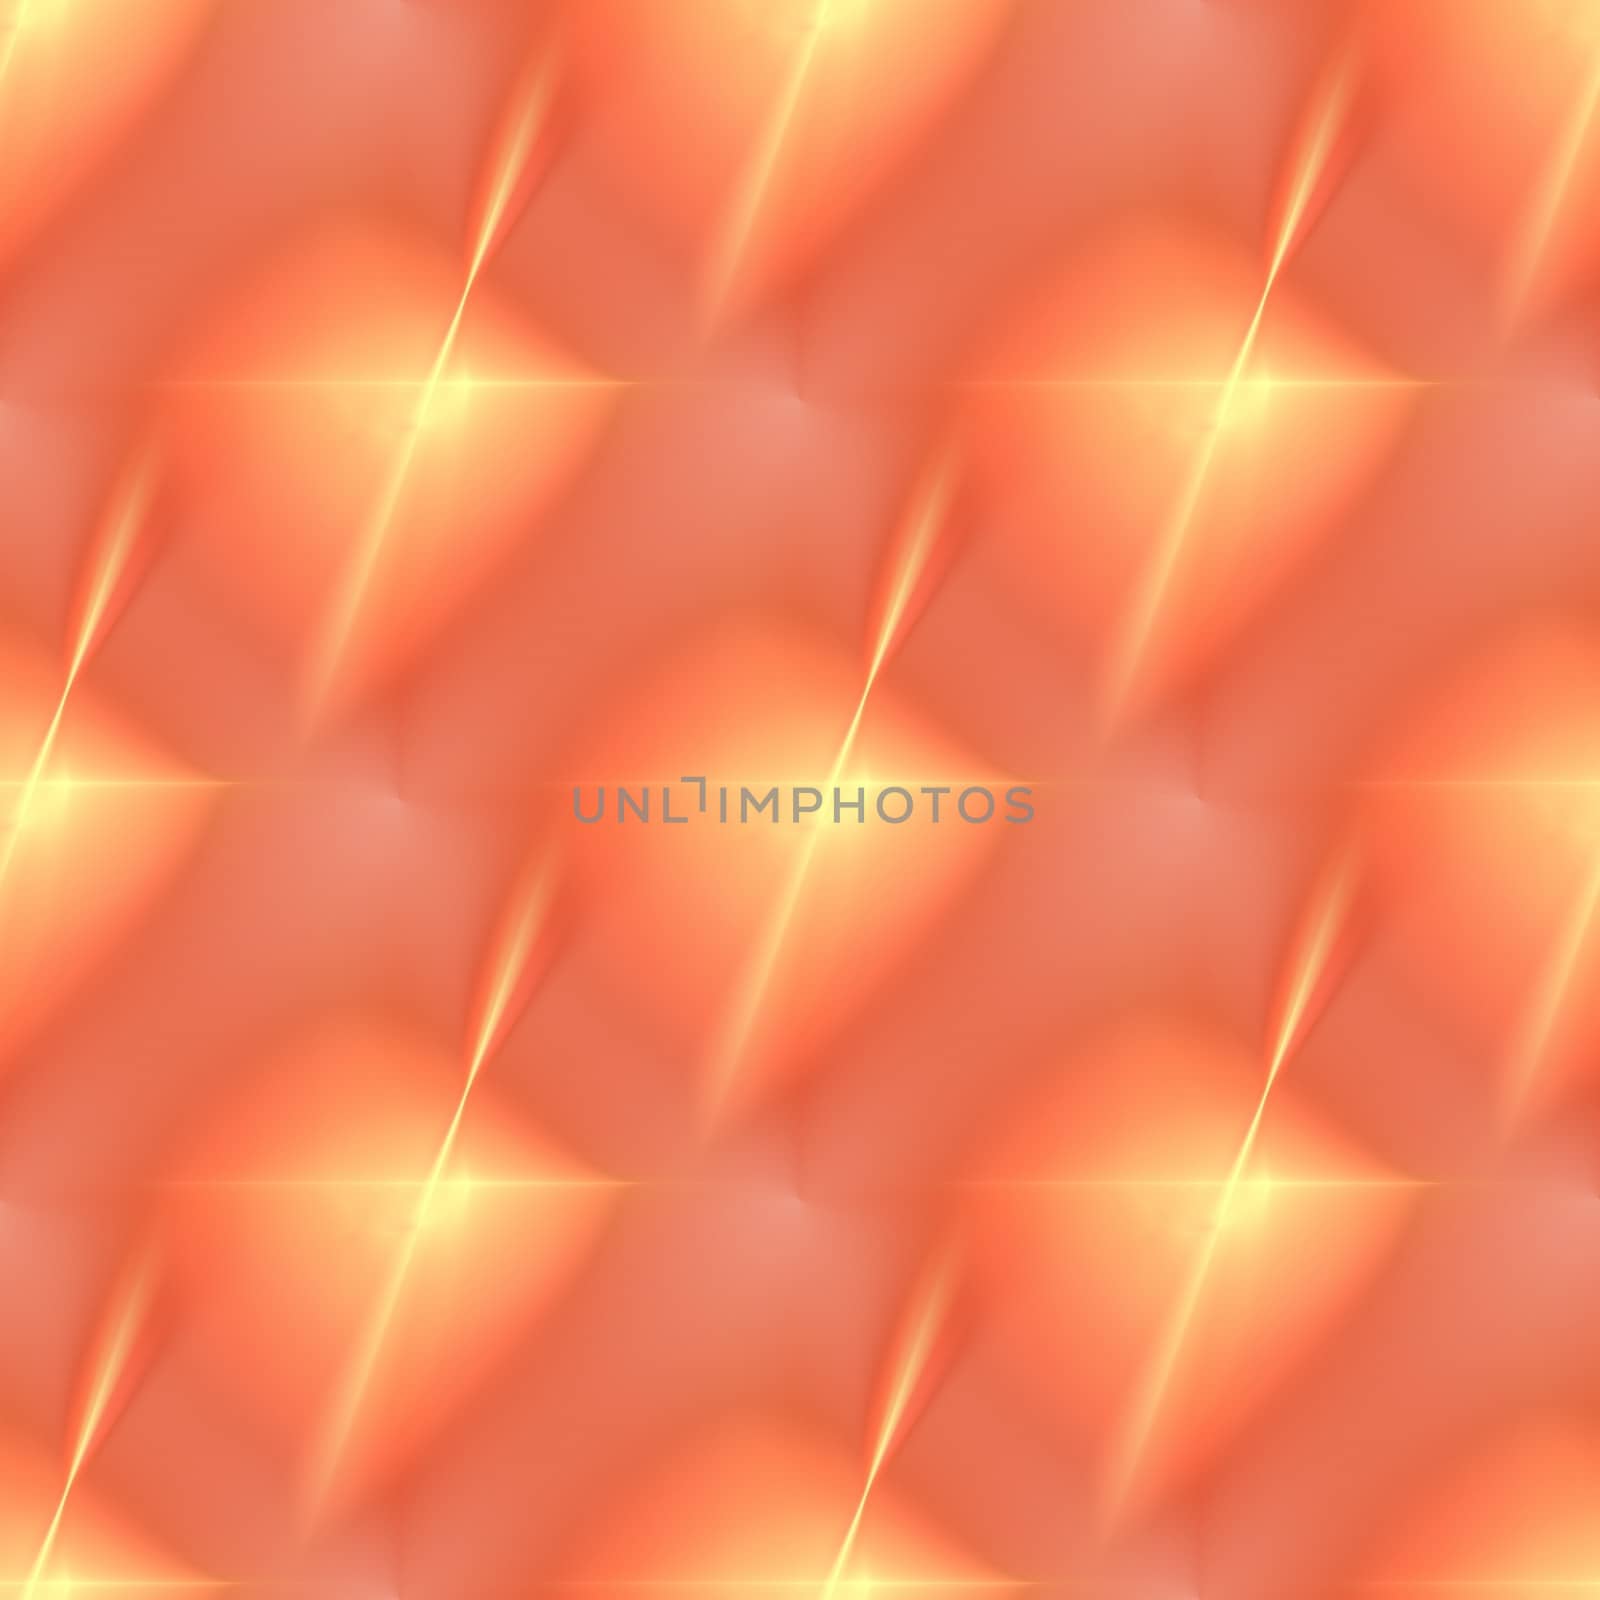 Fractal with vibrant orange color in the shape of a star.